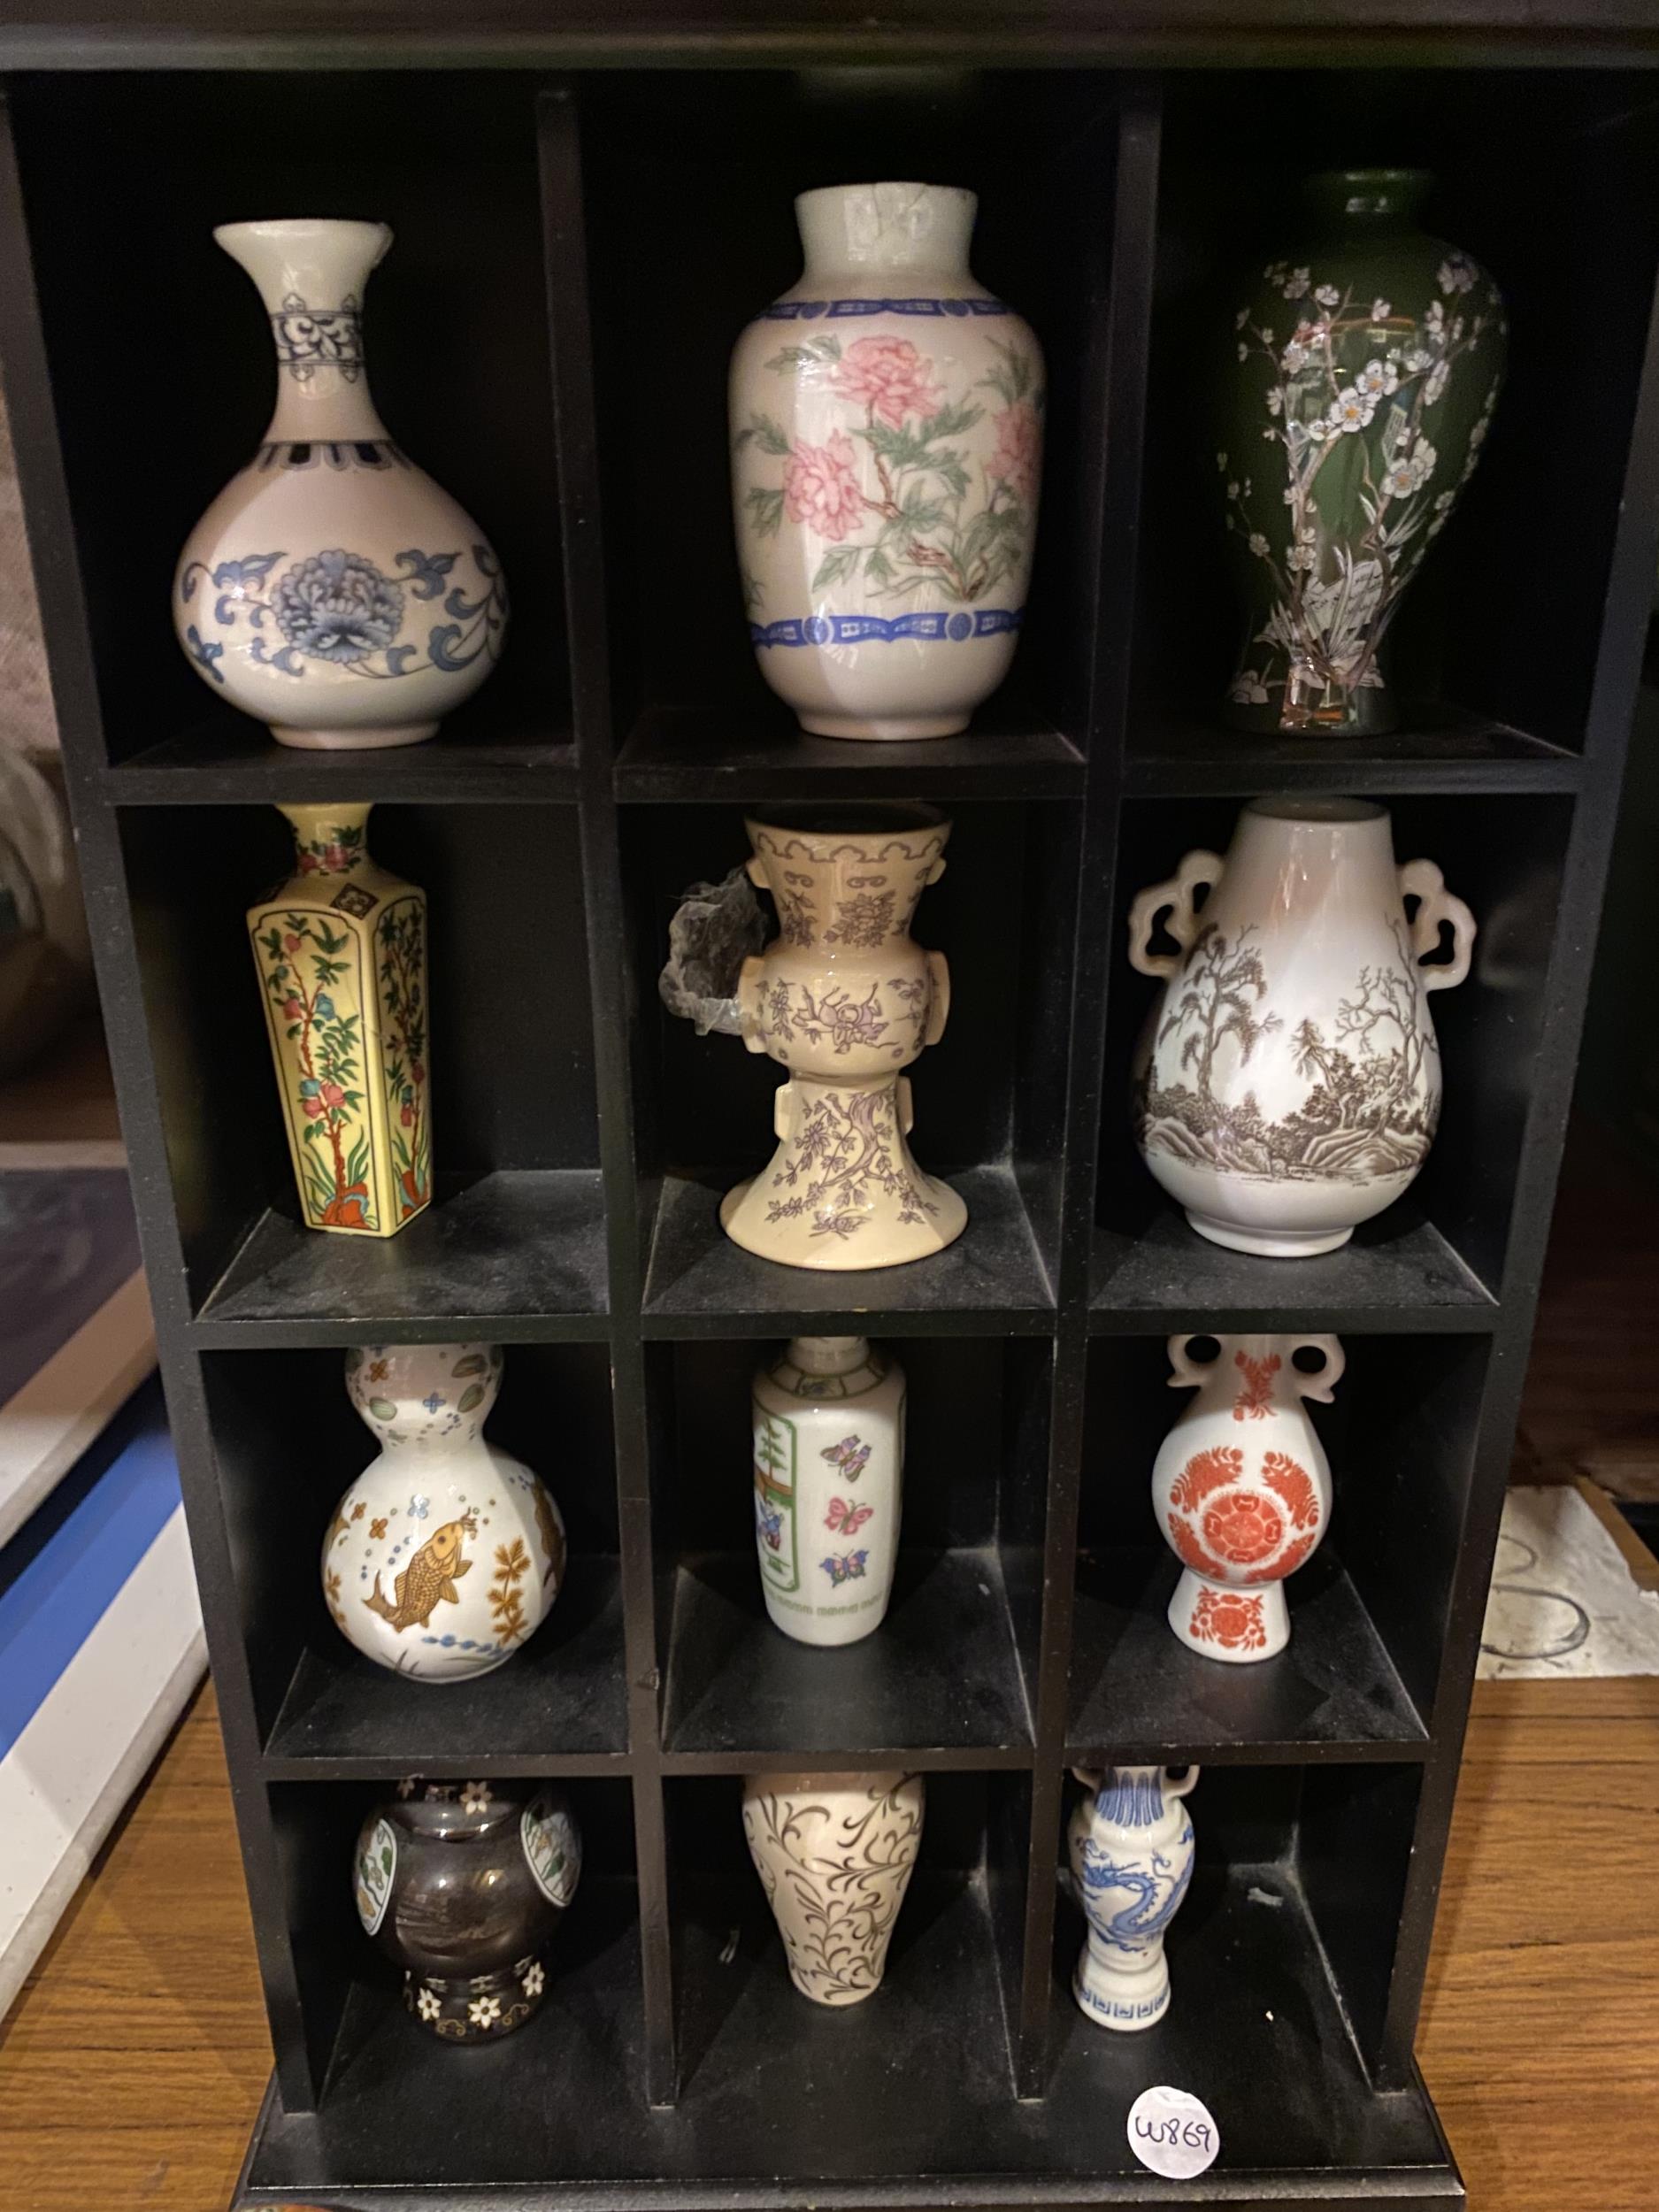 A SMALL DISPLAY CABINET WITH MINIATURE ORIENTAL STYLE VASES. ALSO INCLUDES INFORMATION CARDS AND TWO - Image 2 of 3